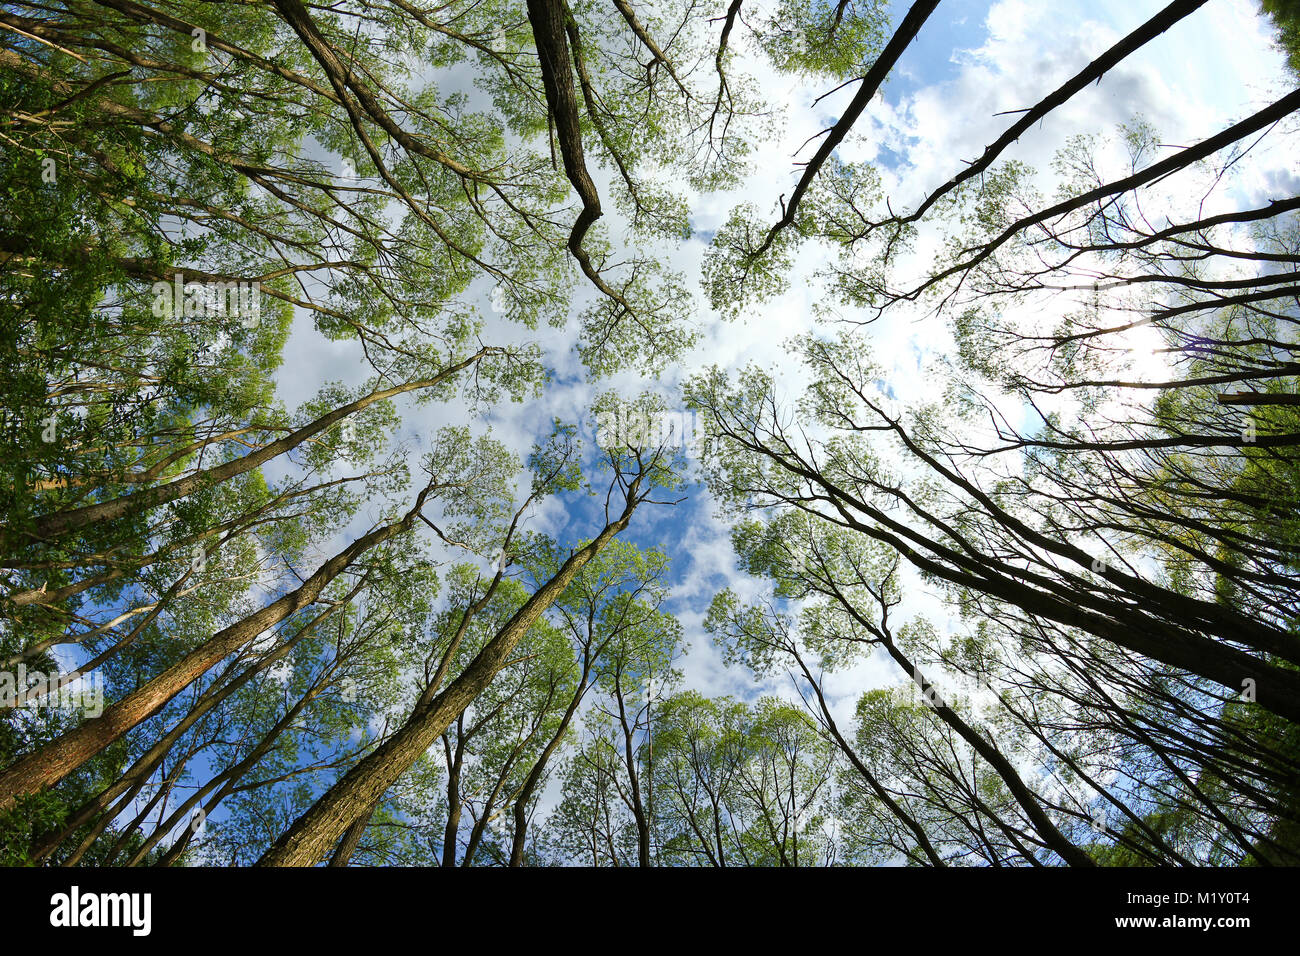 Looking up in the treetops during the hot summer day. The sky is partly cloudy. Stock Photo